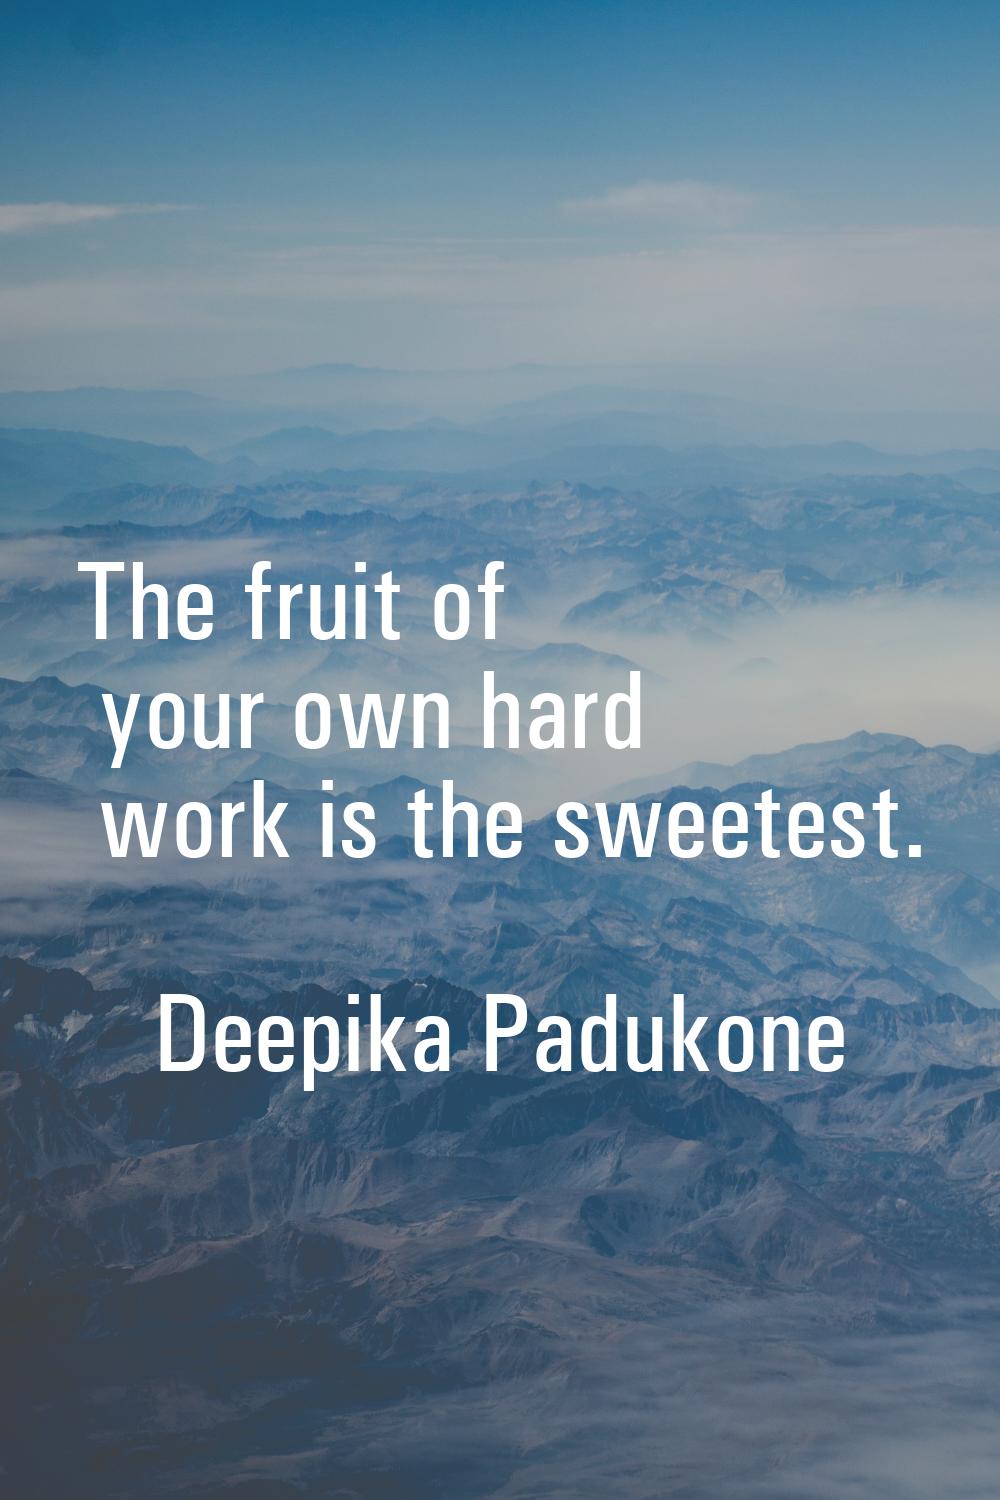 The fruit of your own hard work is the sweetest.